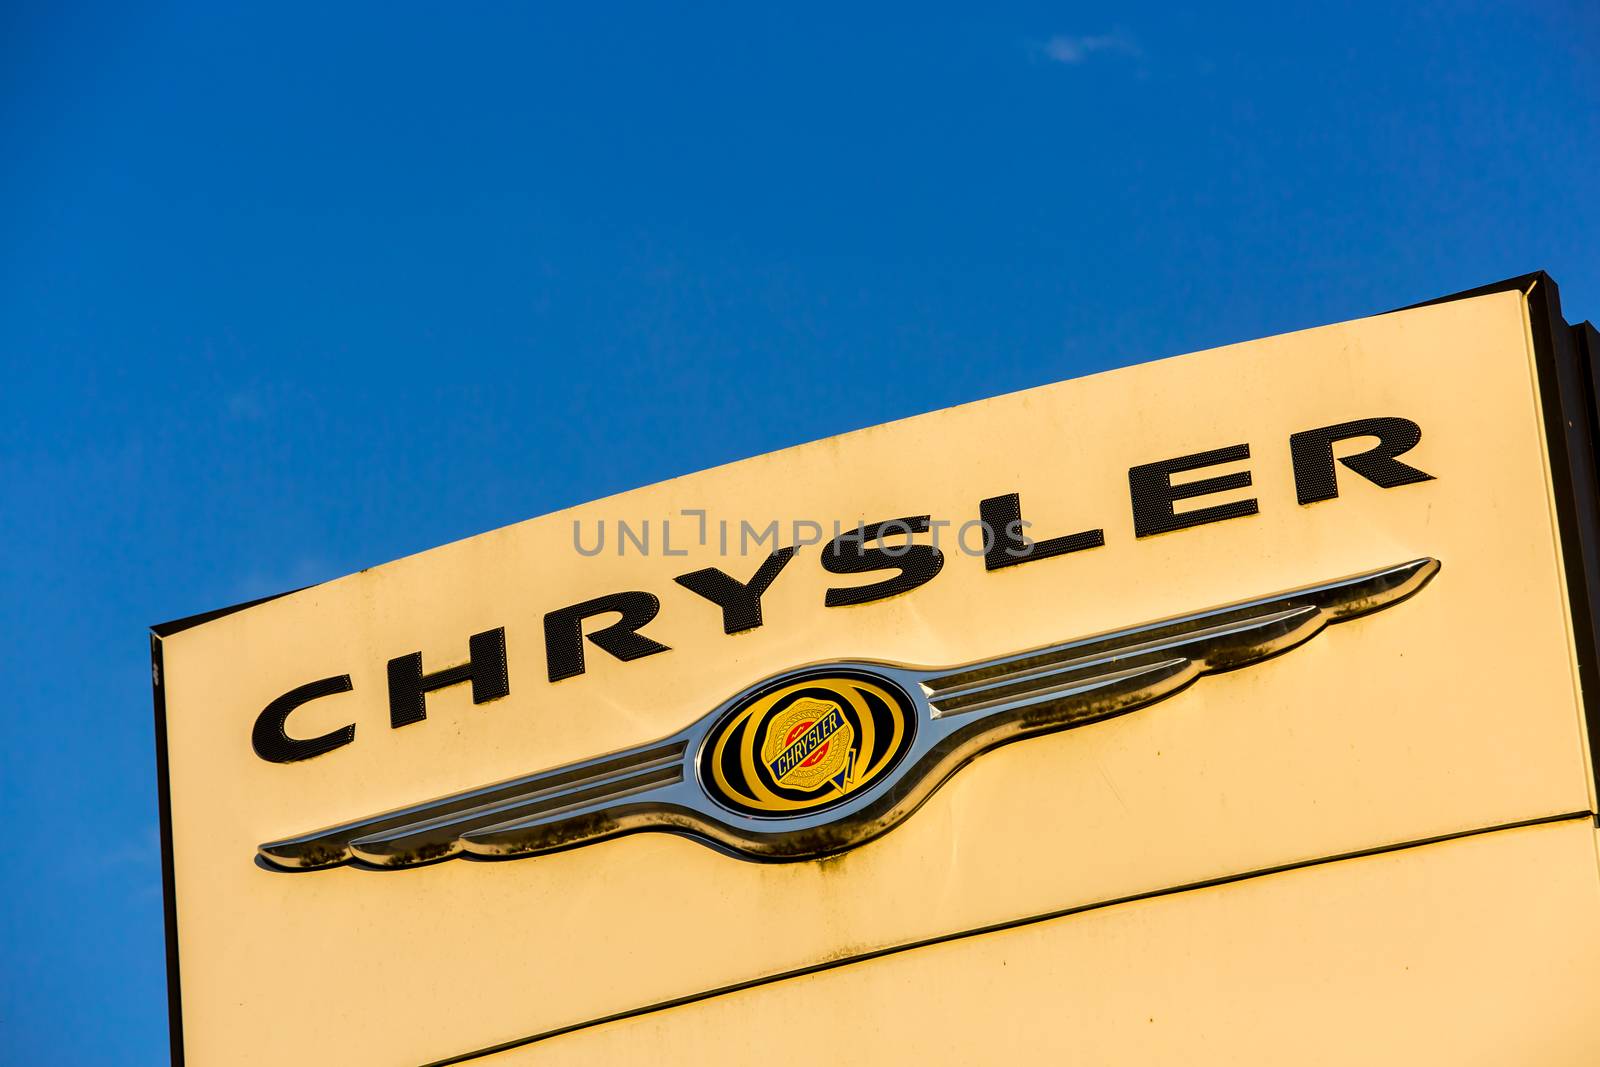 La rochelle, France - August 30, 2016: Official dealership sign of Chrysler against the blue sky. Chrysler is the American subsidiary of Fiat Chrysler Automobiles N.V., an Italian controlled automobile manufacturer registered in the Netherlands with headquarters in London, U.K.